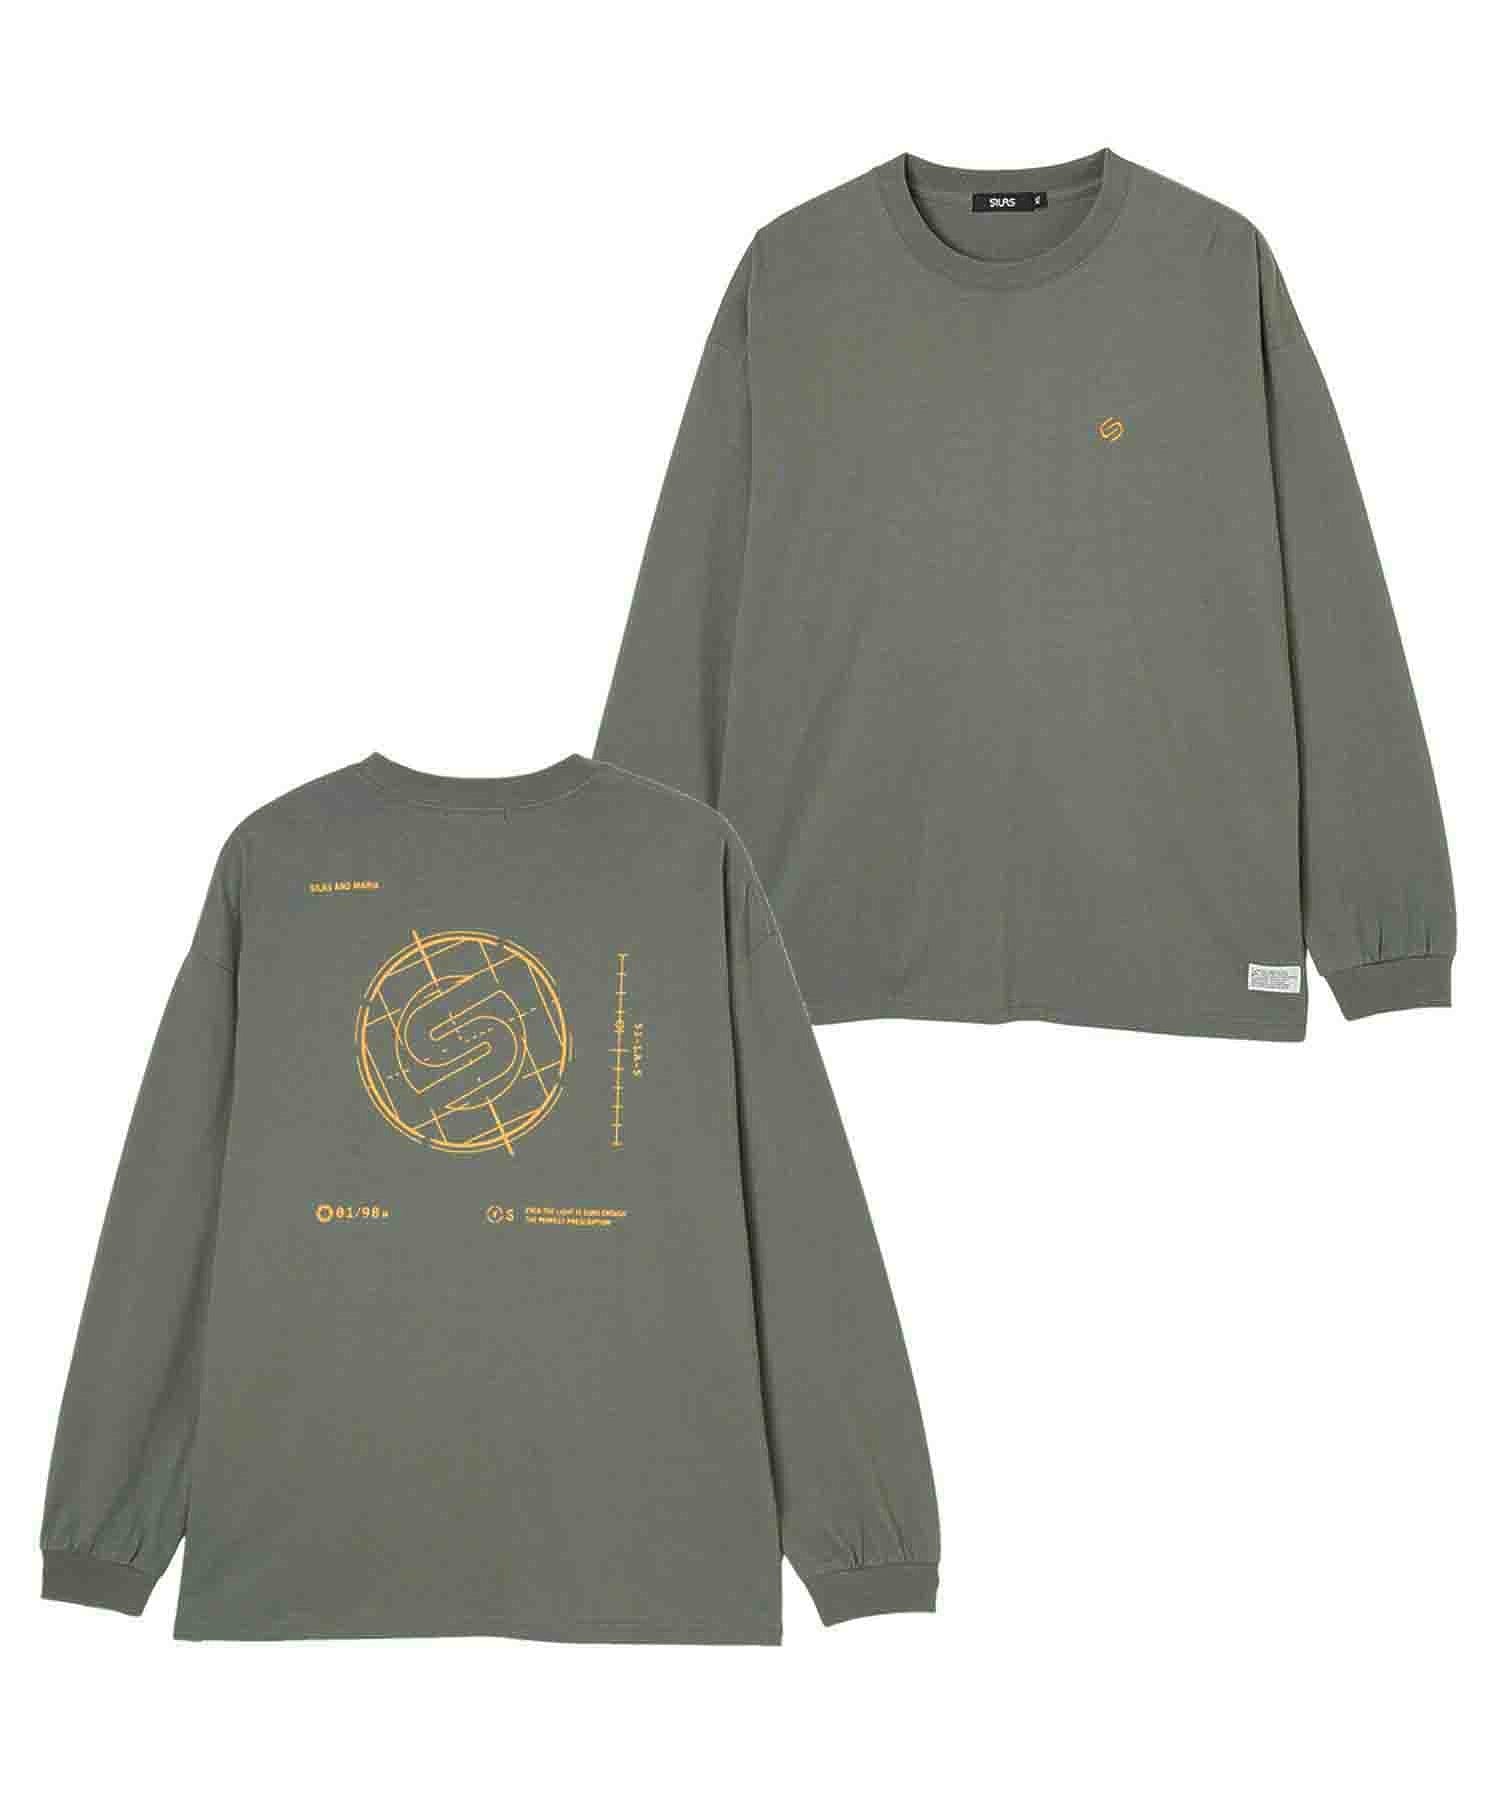 SCOPE WIDE LS TEE SILAS